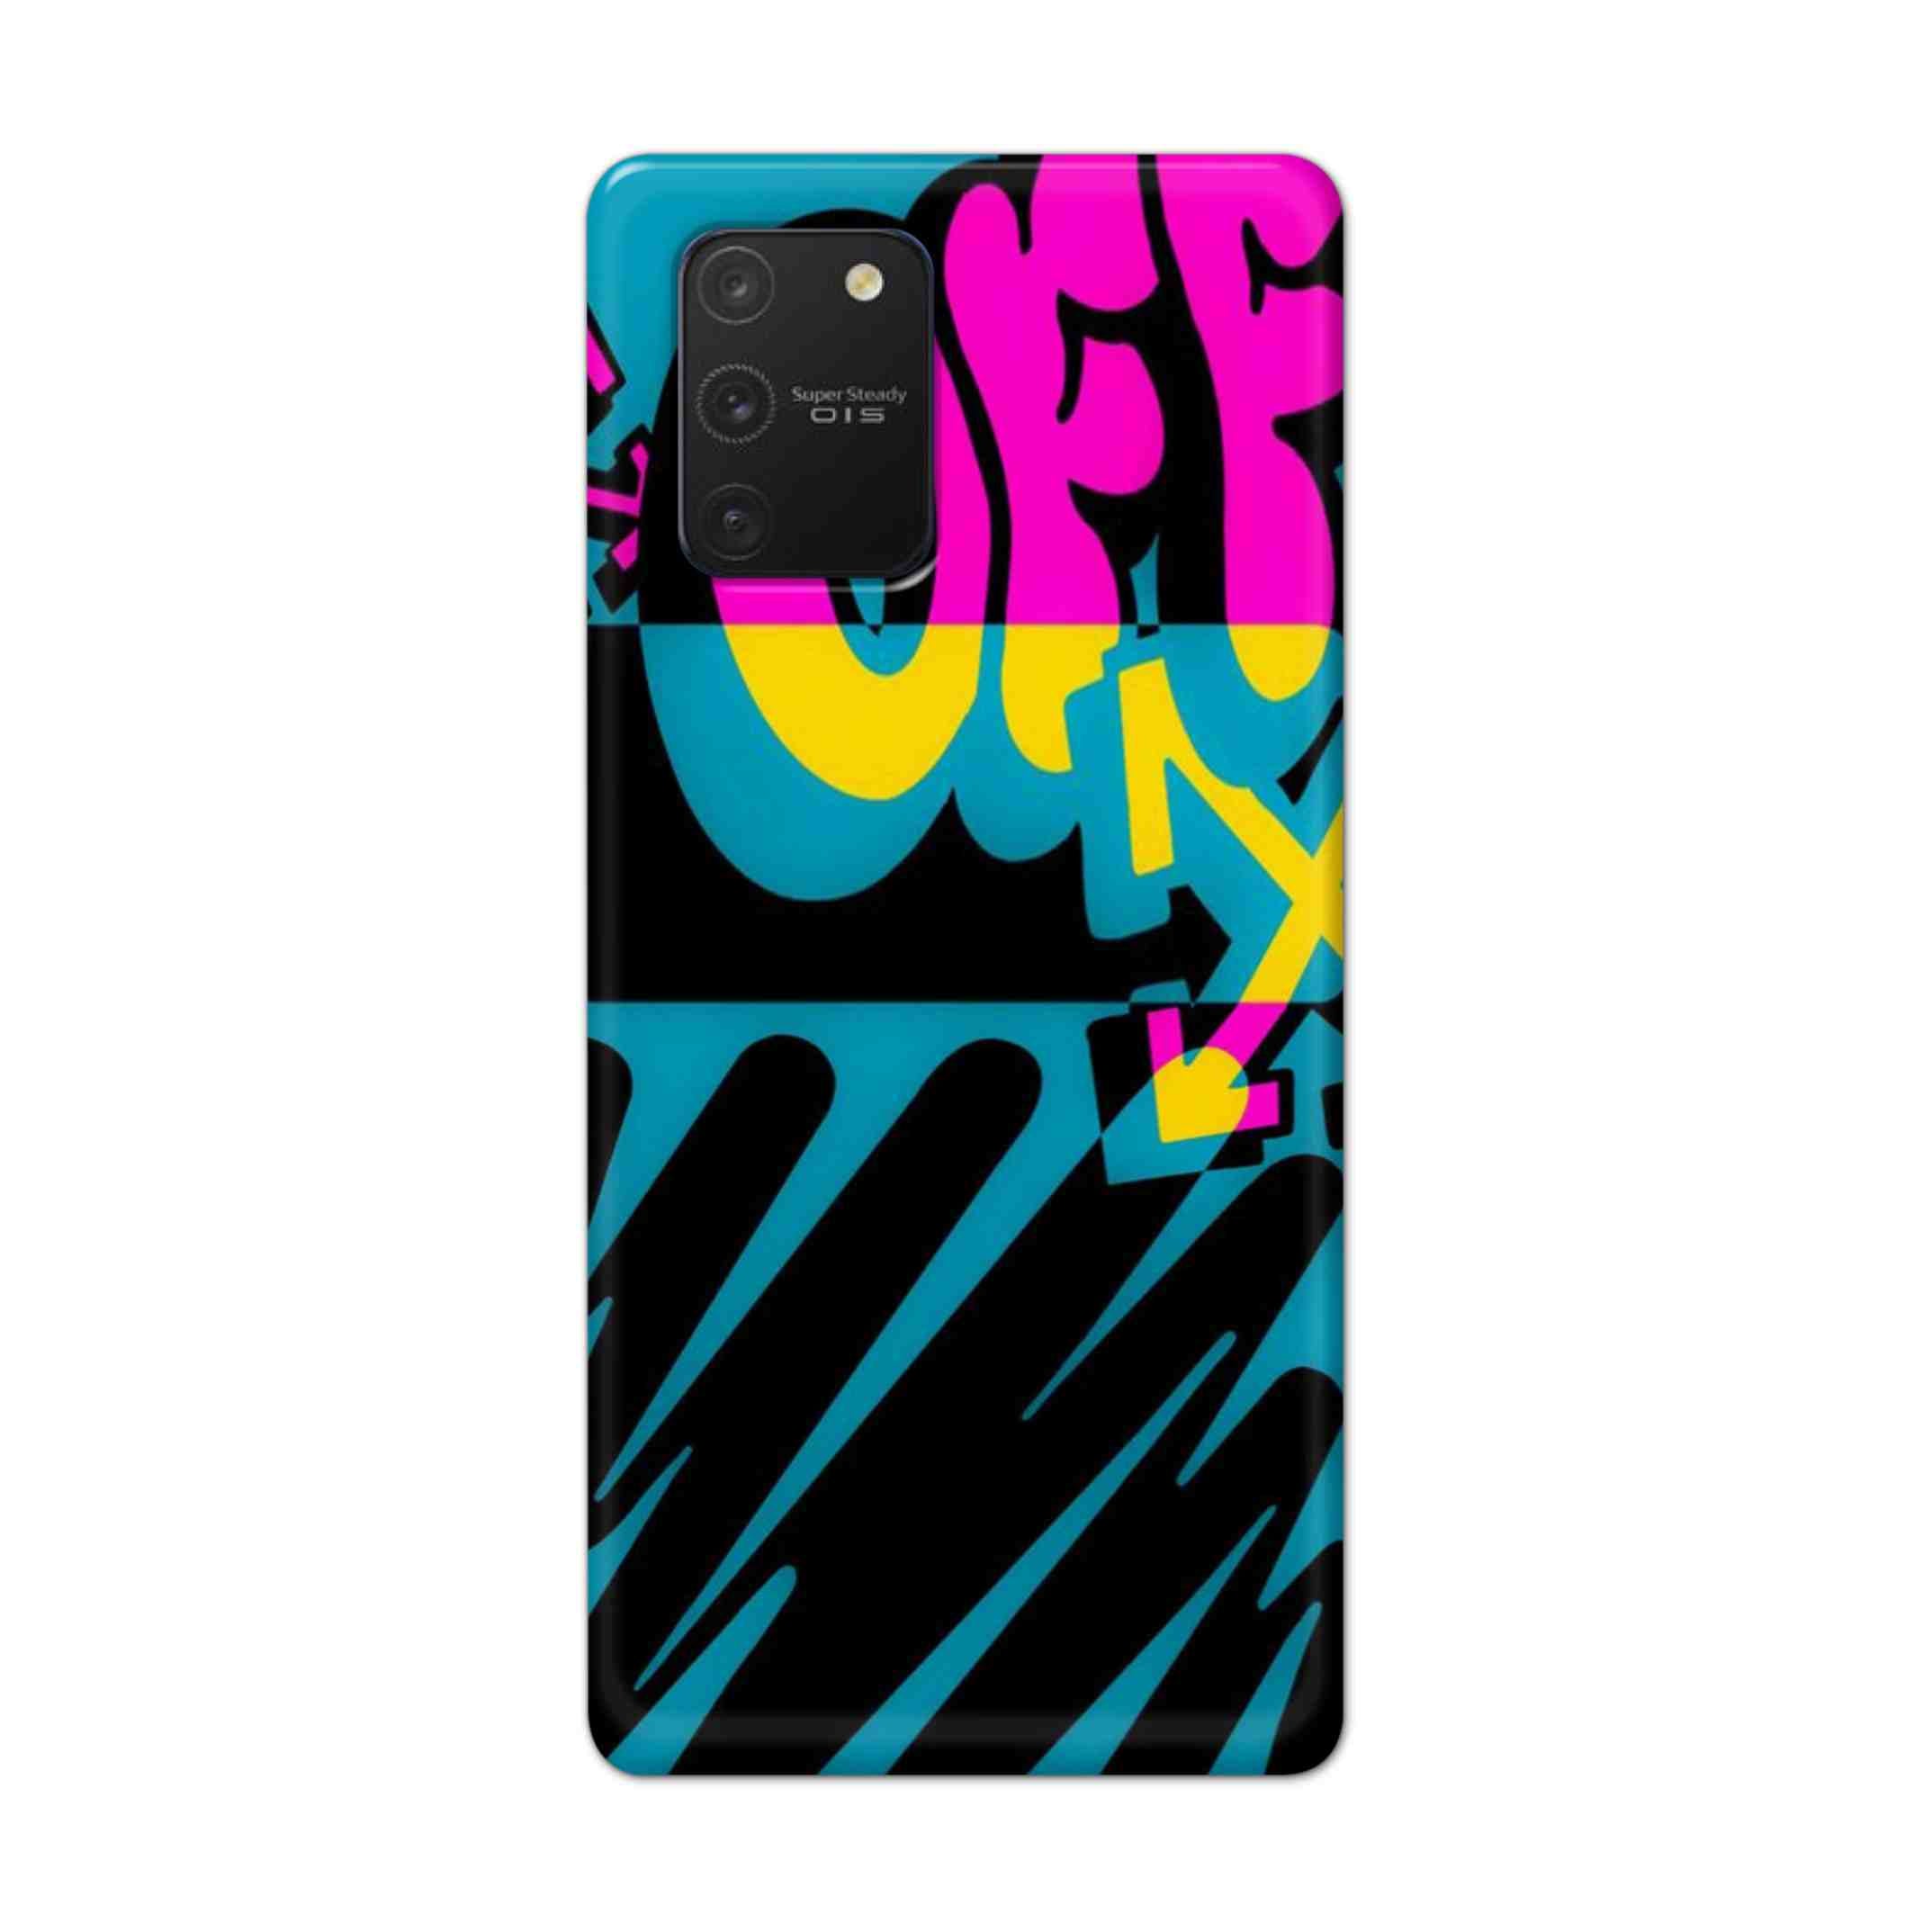 Buy Off Hard Back Mobile Phone Case Cover For Samsung Galaxy S10 Lite Online